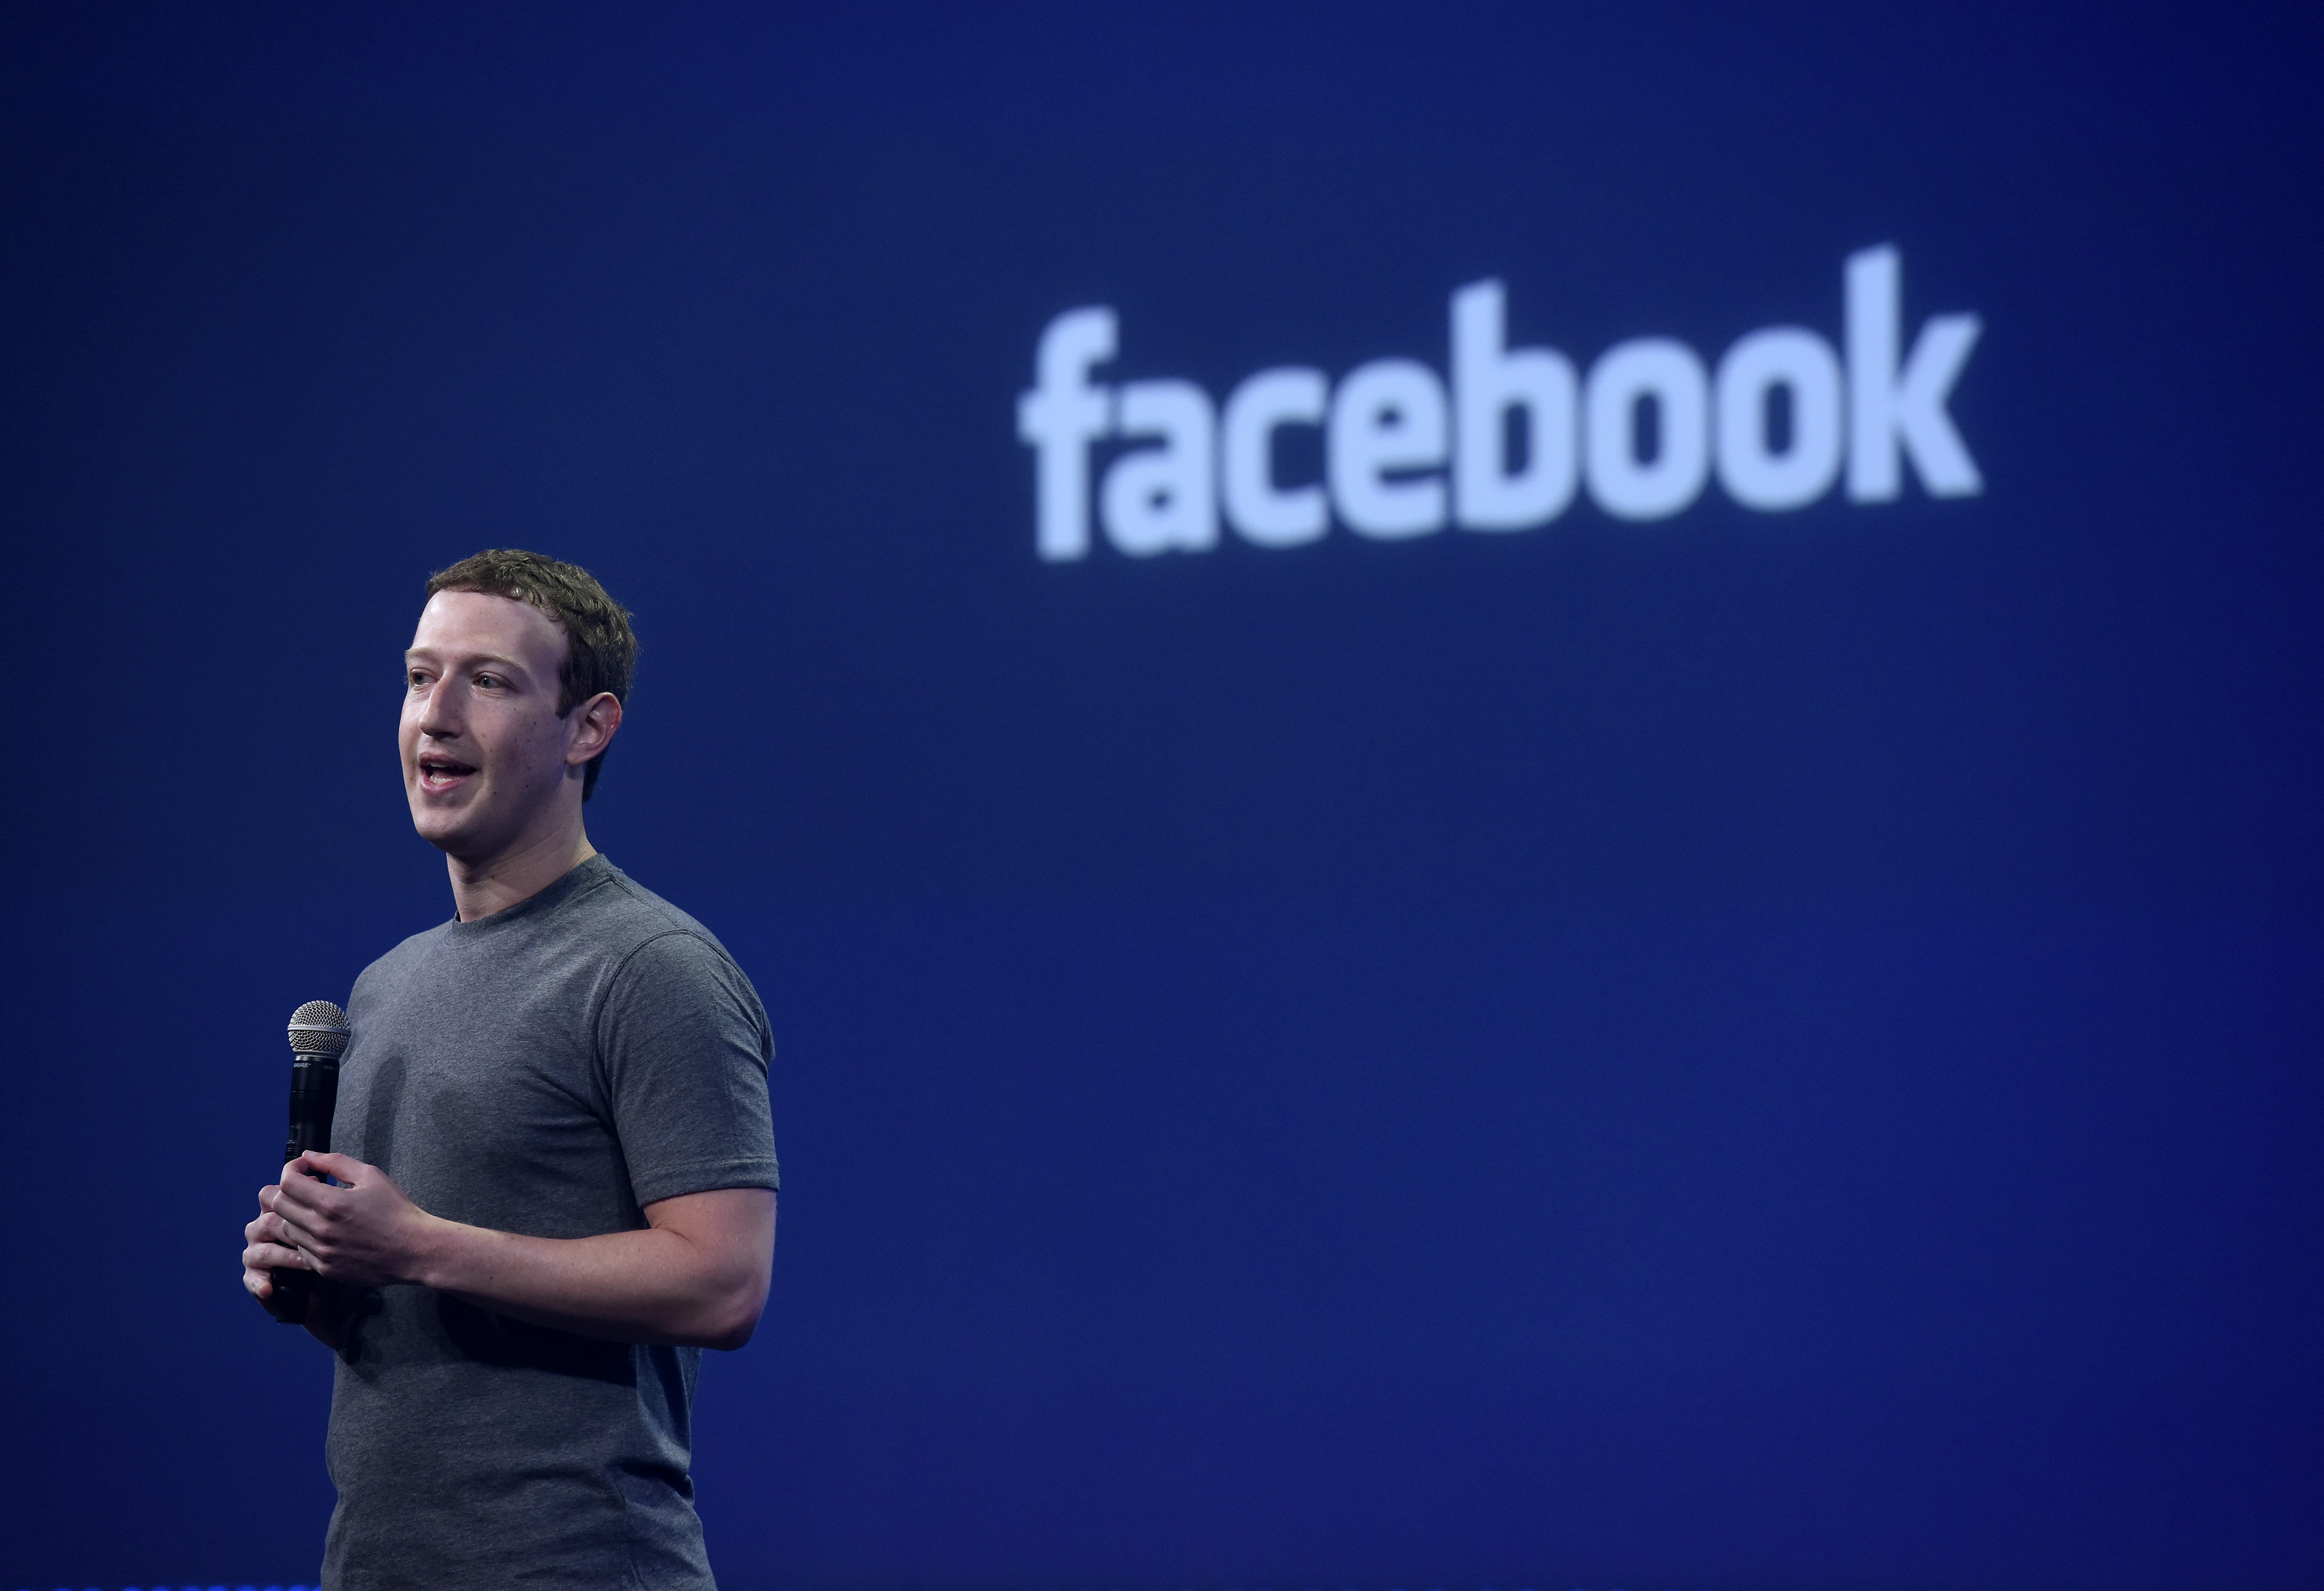 Mark Zuckerberg, chief executive officer of Facebook Inc., speaks during the Facebook F8 Developers Conference in San Francisco, California, U.S., on Wednesday, March 25, 2015. Zuckerberg plans to unveil tools that let application makers reach the social network's audience while helping the company boost revenue. Photographer: David Paul Morris/Bloomberg via Getty Images (Bloomberg&mdash;Bloomberg via Getty Images)